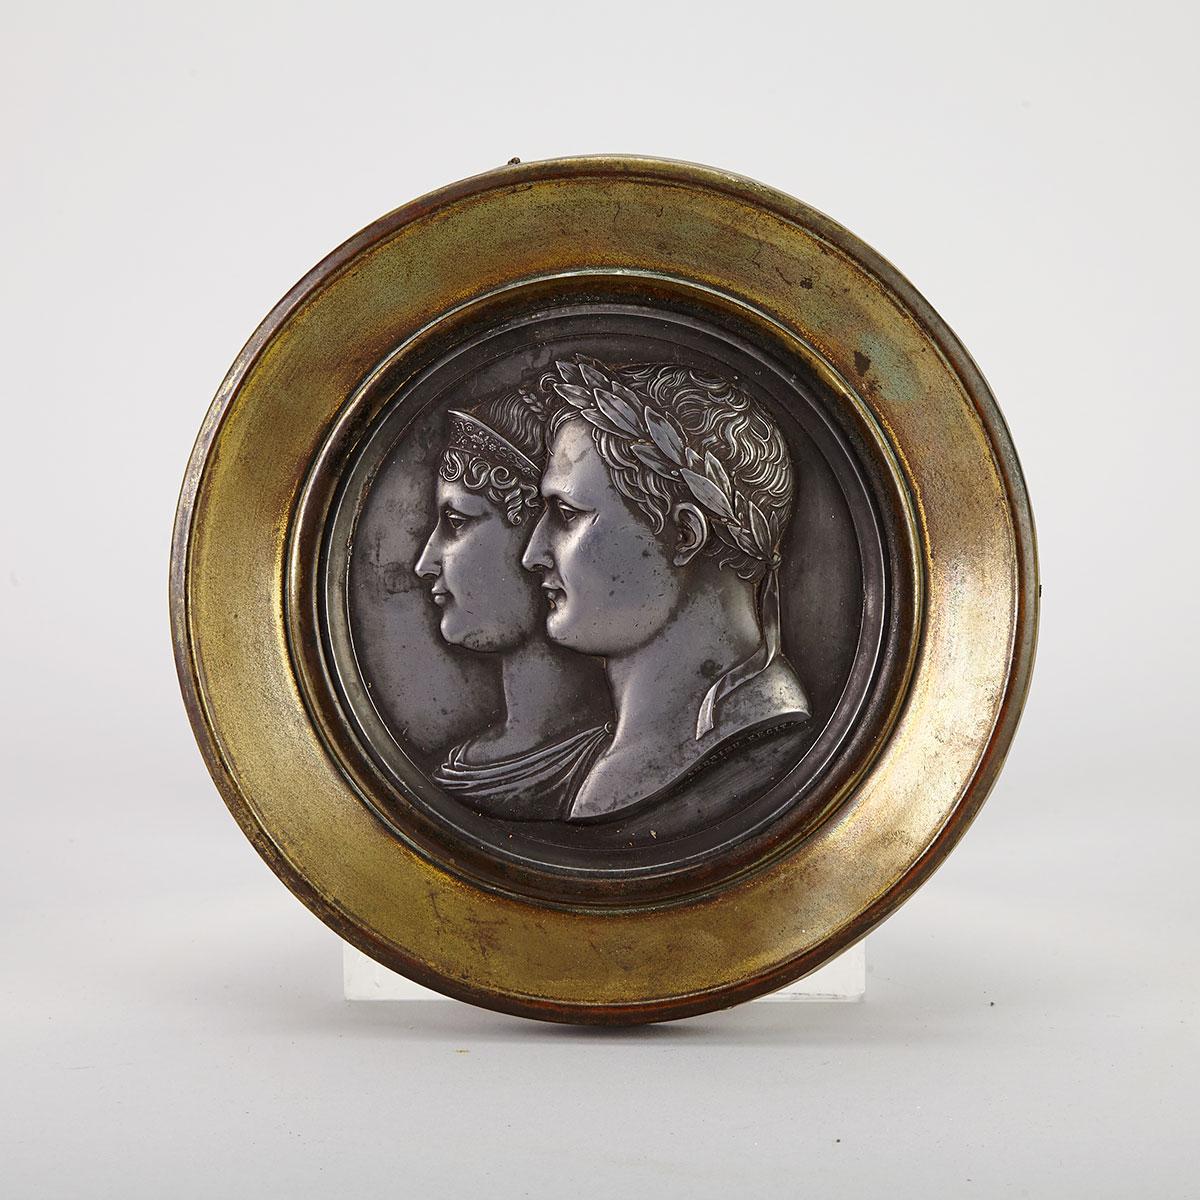 French Electrotype Pewter Relief Portrait Roundel of Napoleon Josephine after Jean Bertrand Andrieu (1761-1822), c.1850